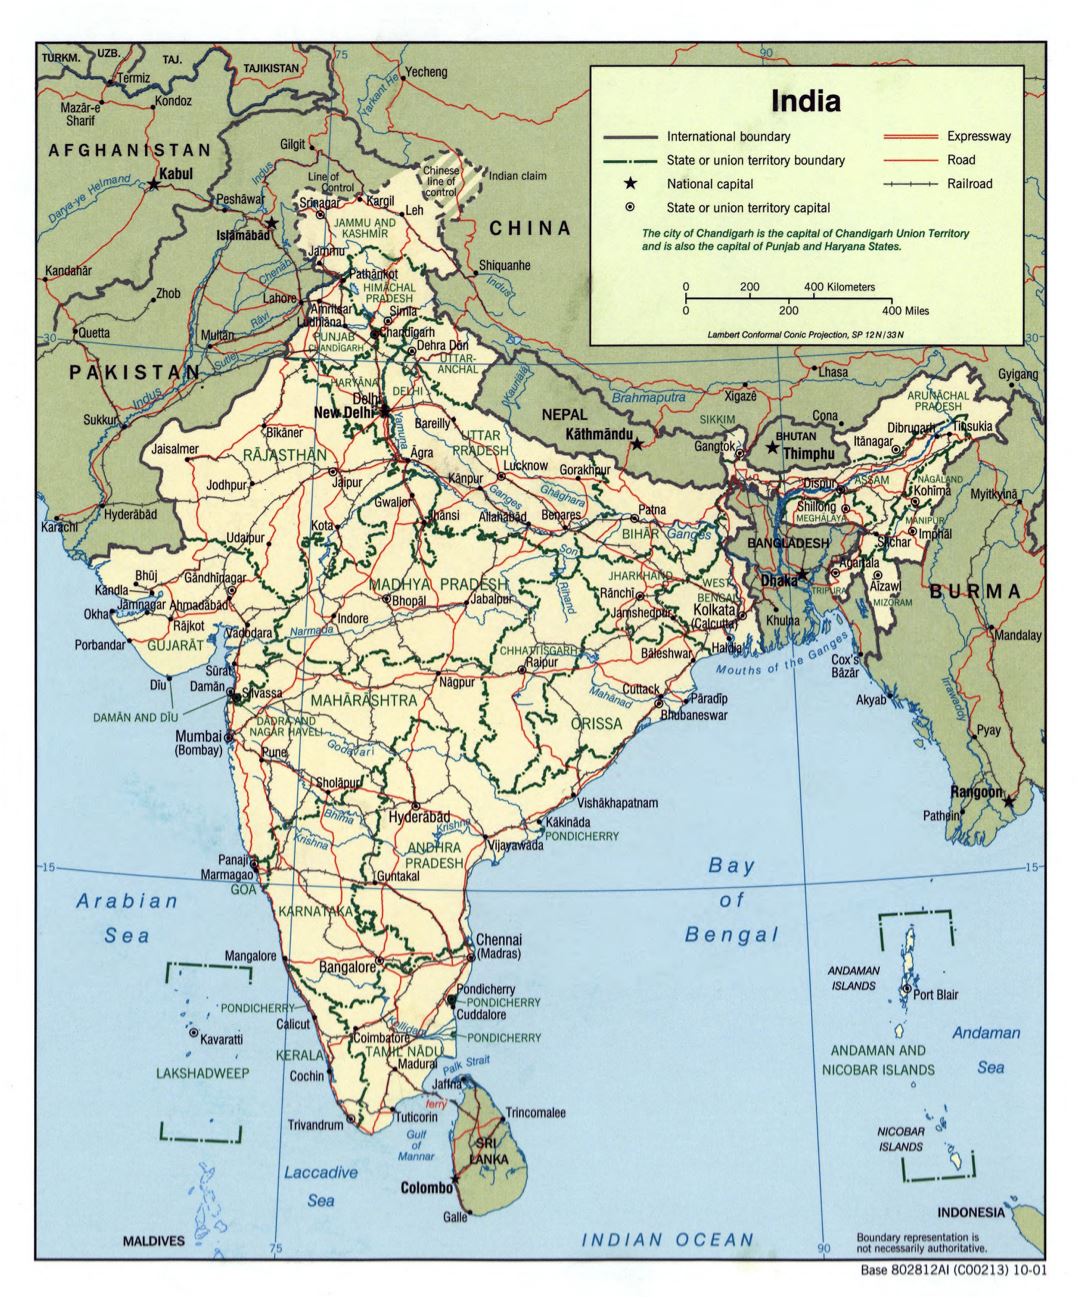 Large scale political and administrative map of India with roads, railroads and major cities - 2001